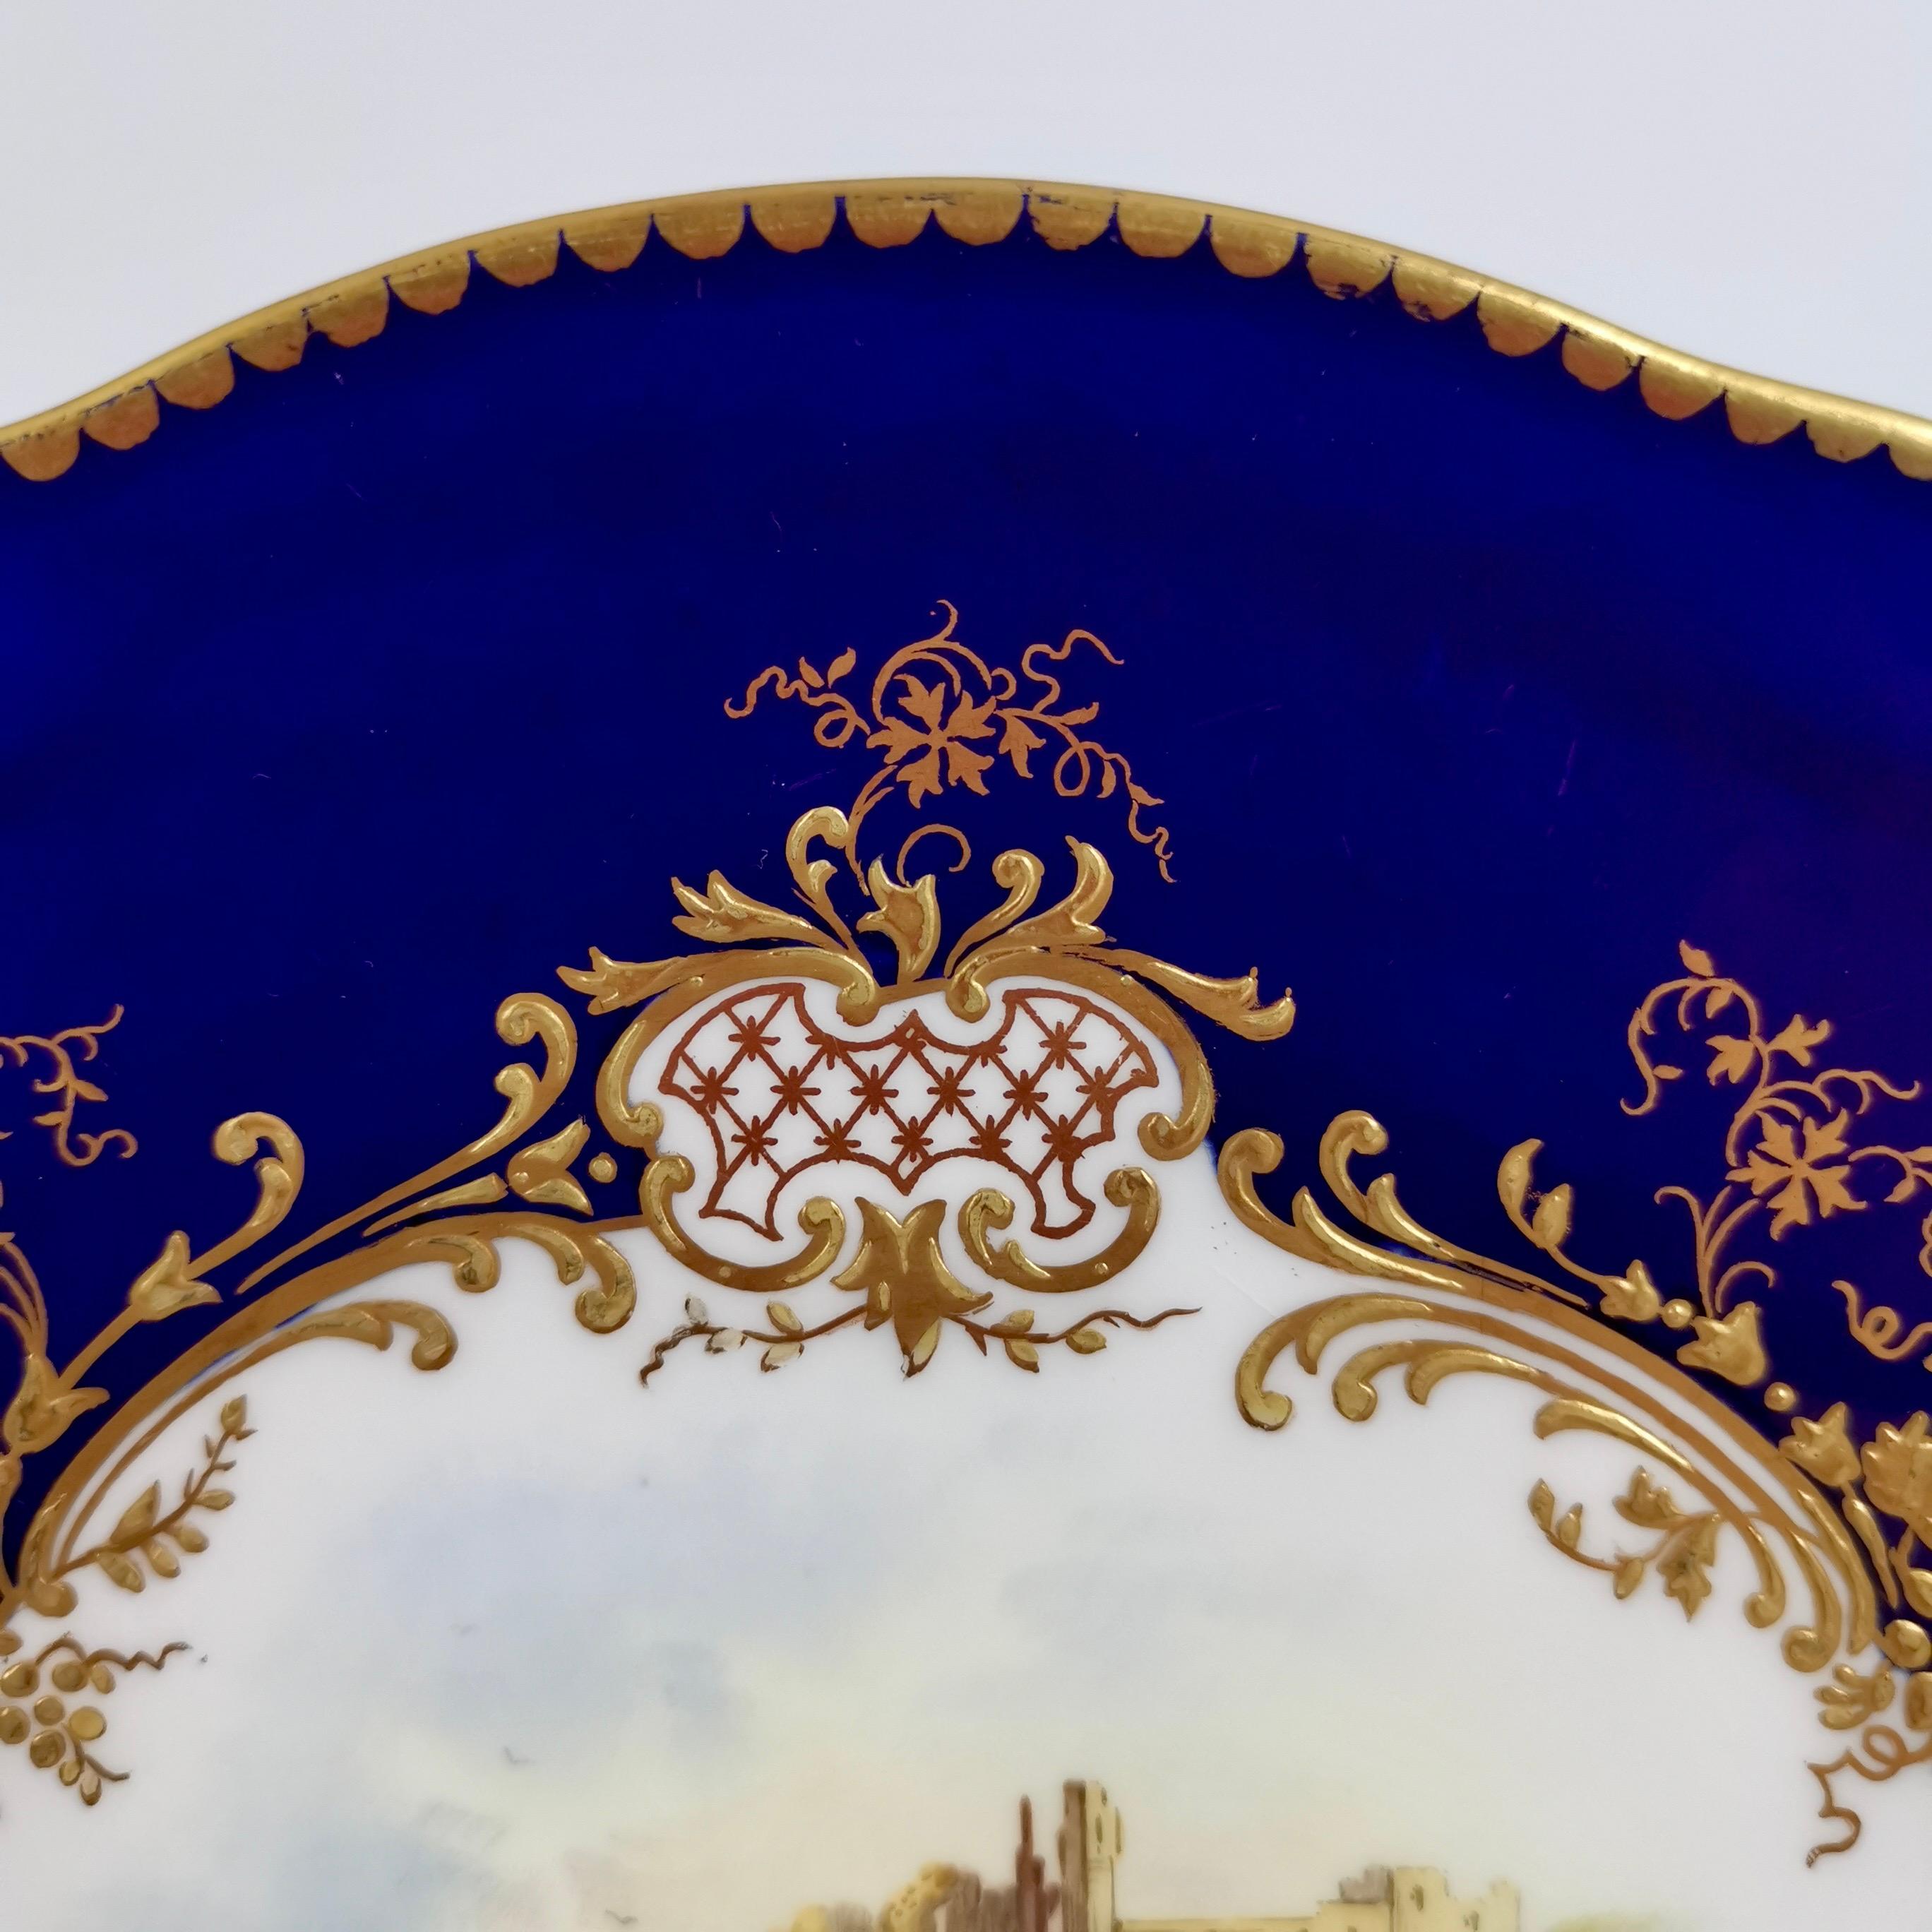 Early 20th Century Plate by Coalport for Thomas Goode, Tantallon Castle by P. Simpson, 1915